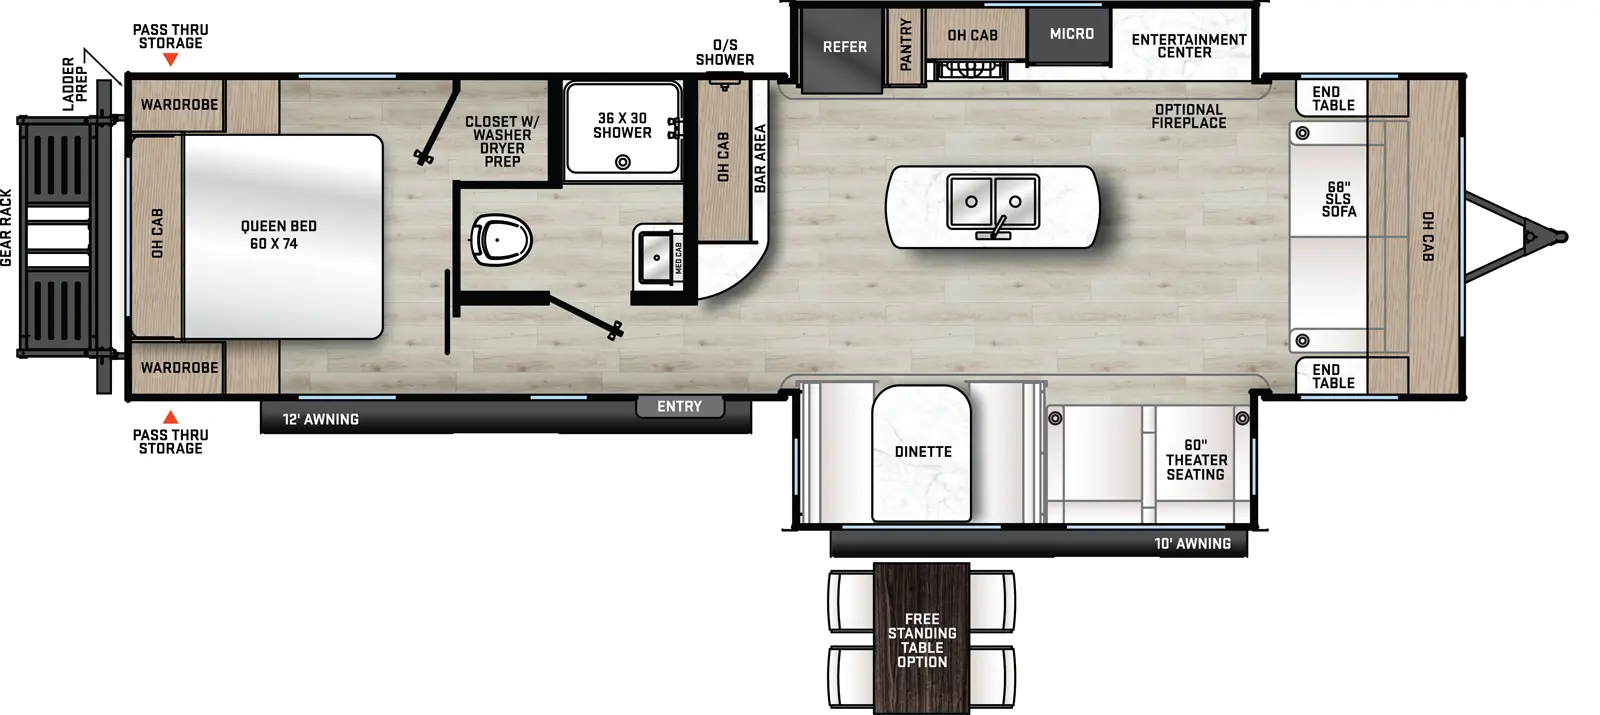 The 283FEDS has two slideouts and one entry. Exterior features outside shower, rear pass-thru storage, 12 foot awning and 10 foot awning, rear gear rack, and ladder prep. Interior layout front to back: SLS sofa with overhead cabinet and end tables on each side; off-door side slideout with entertainment center with optional fireplace, microwave, kitchen counter with cooktop, overhead cabinet, pantry, and refrigerator; kitchen island with sink; door side slideout with theater seating and dinette (optional free-standing dinette); bar area with overhead cabinet along inner wall; off-door side full bathroom; entry; rear bedroom with off-door side closet with washer/dryer prep, and front-facing queen bed with overhead cabinet and wardrobes on each side.